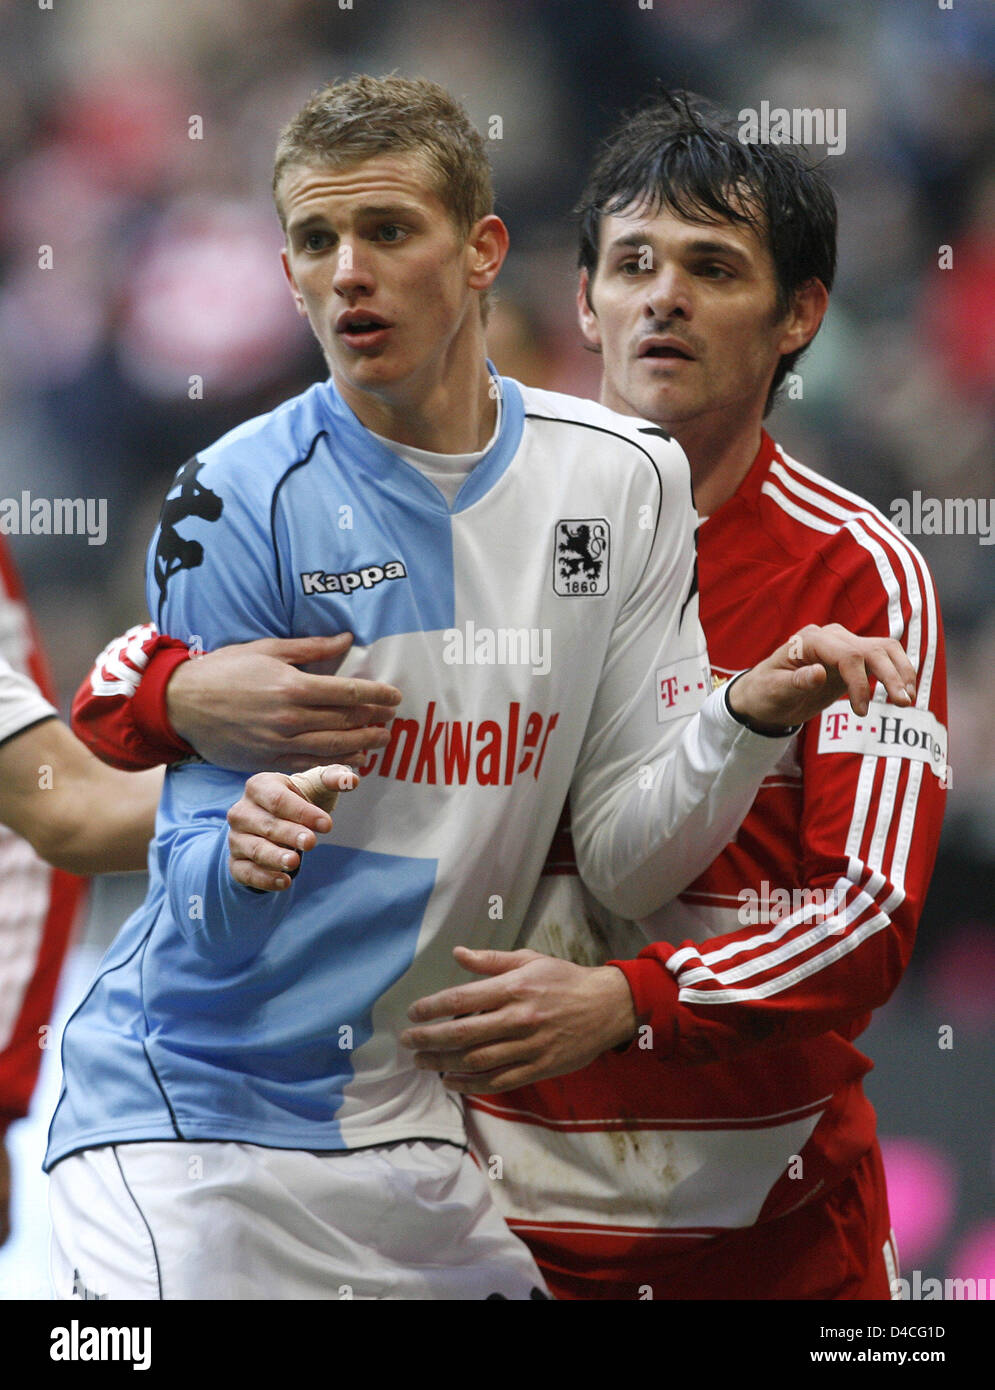 Bayern Munich's Willy Sagnol (R) and 1860 Munich's Lars Bender (L) shown in  action during the soccer friendly FC Bayern Munich vs TSV 1860 Munich at  Allianz-Arena in Munich, Germany, 26 January